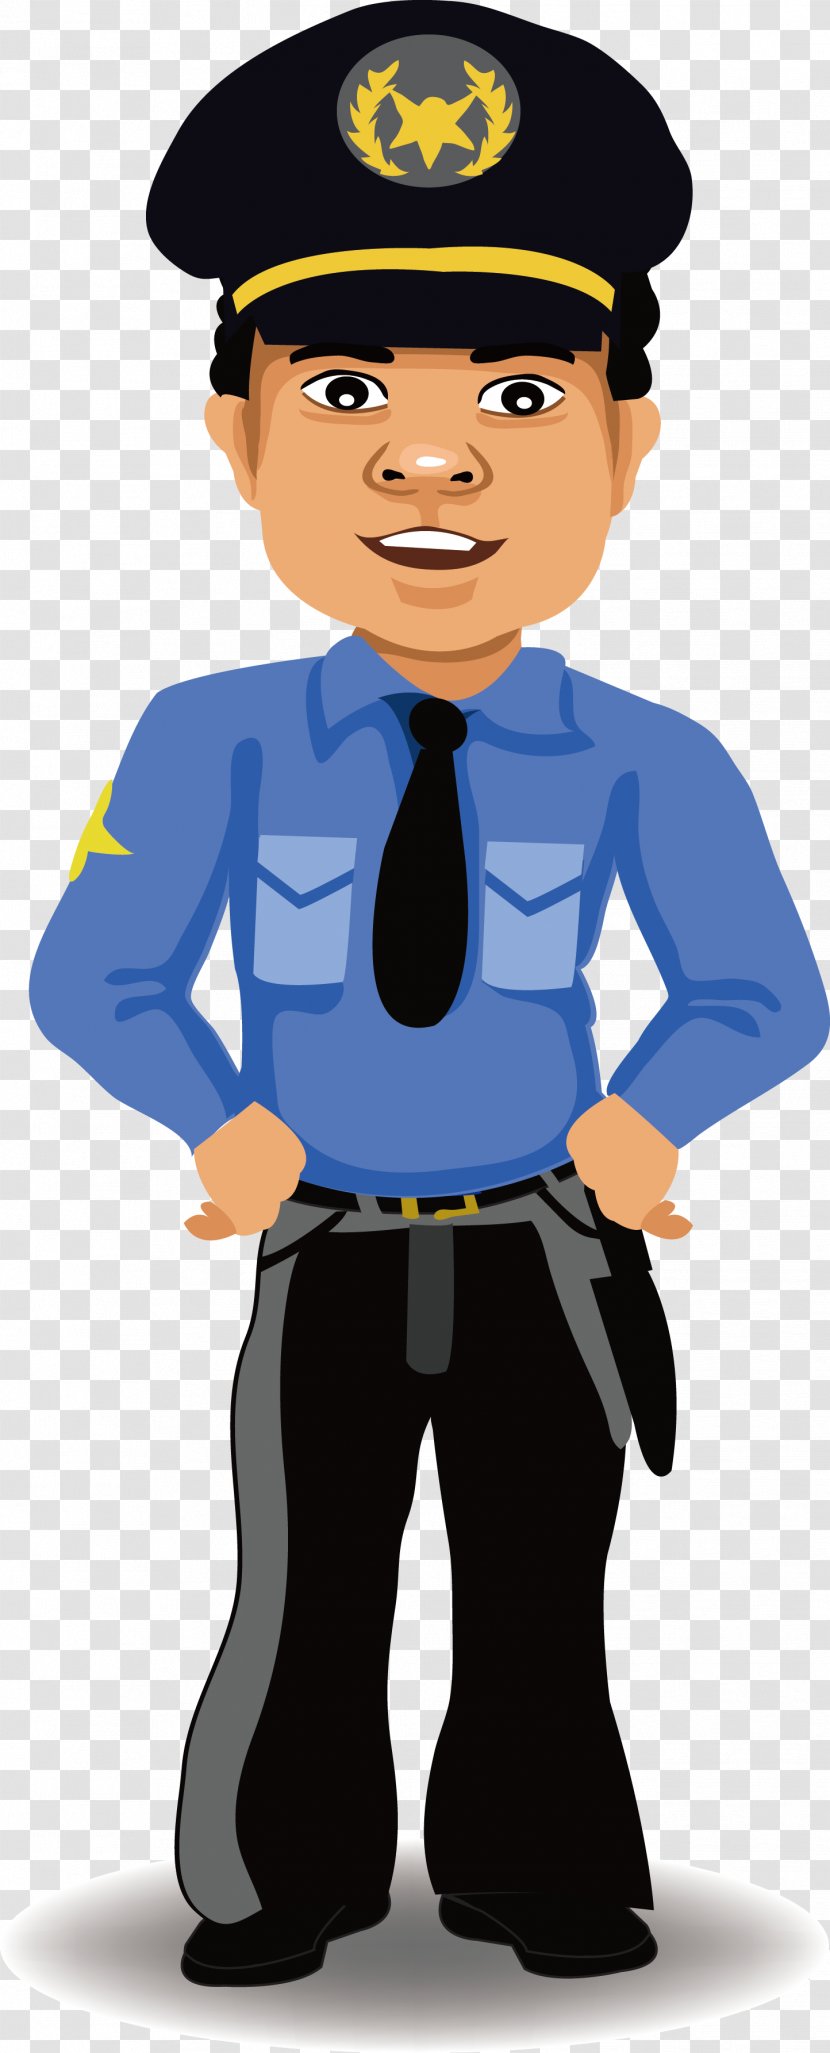 Police Officer Cartoon Security - People's Vector Transparent PNG